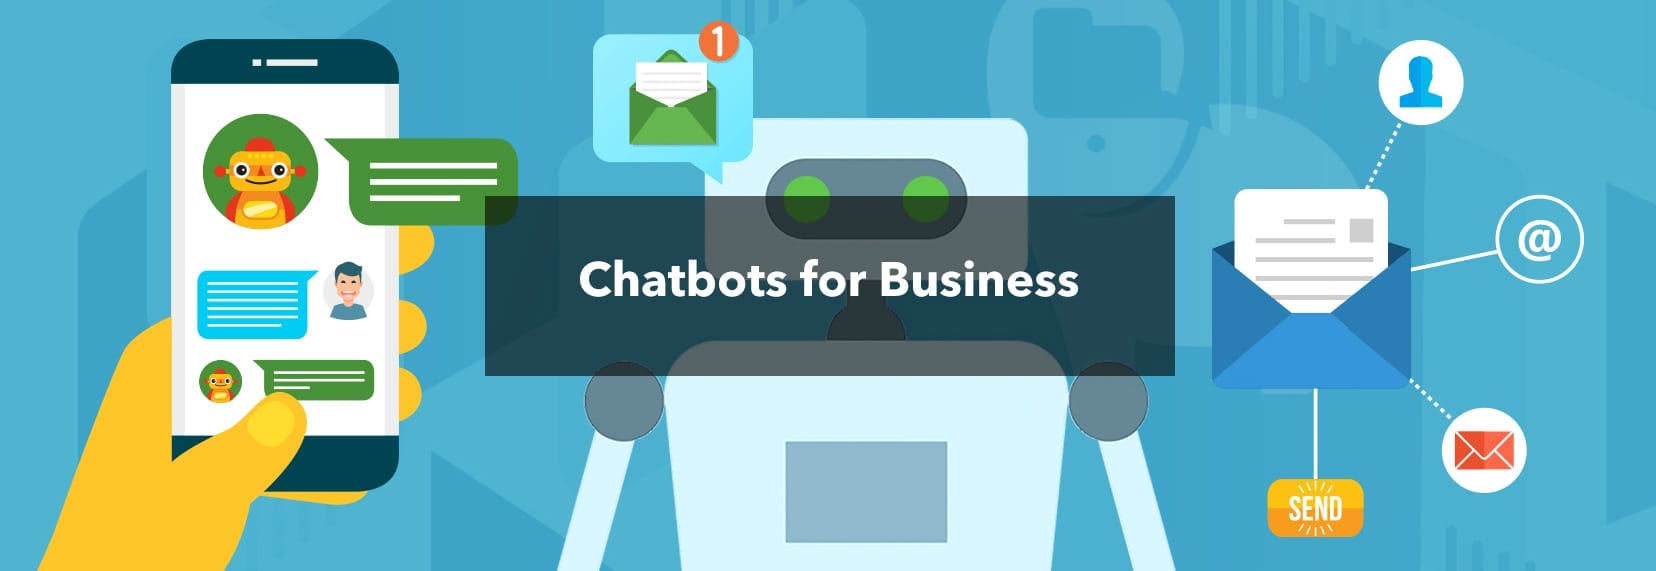 Chatbots for Business